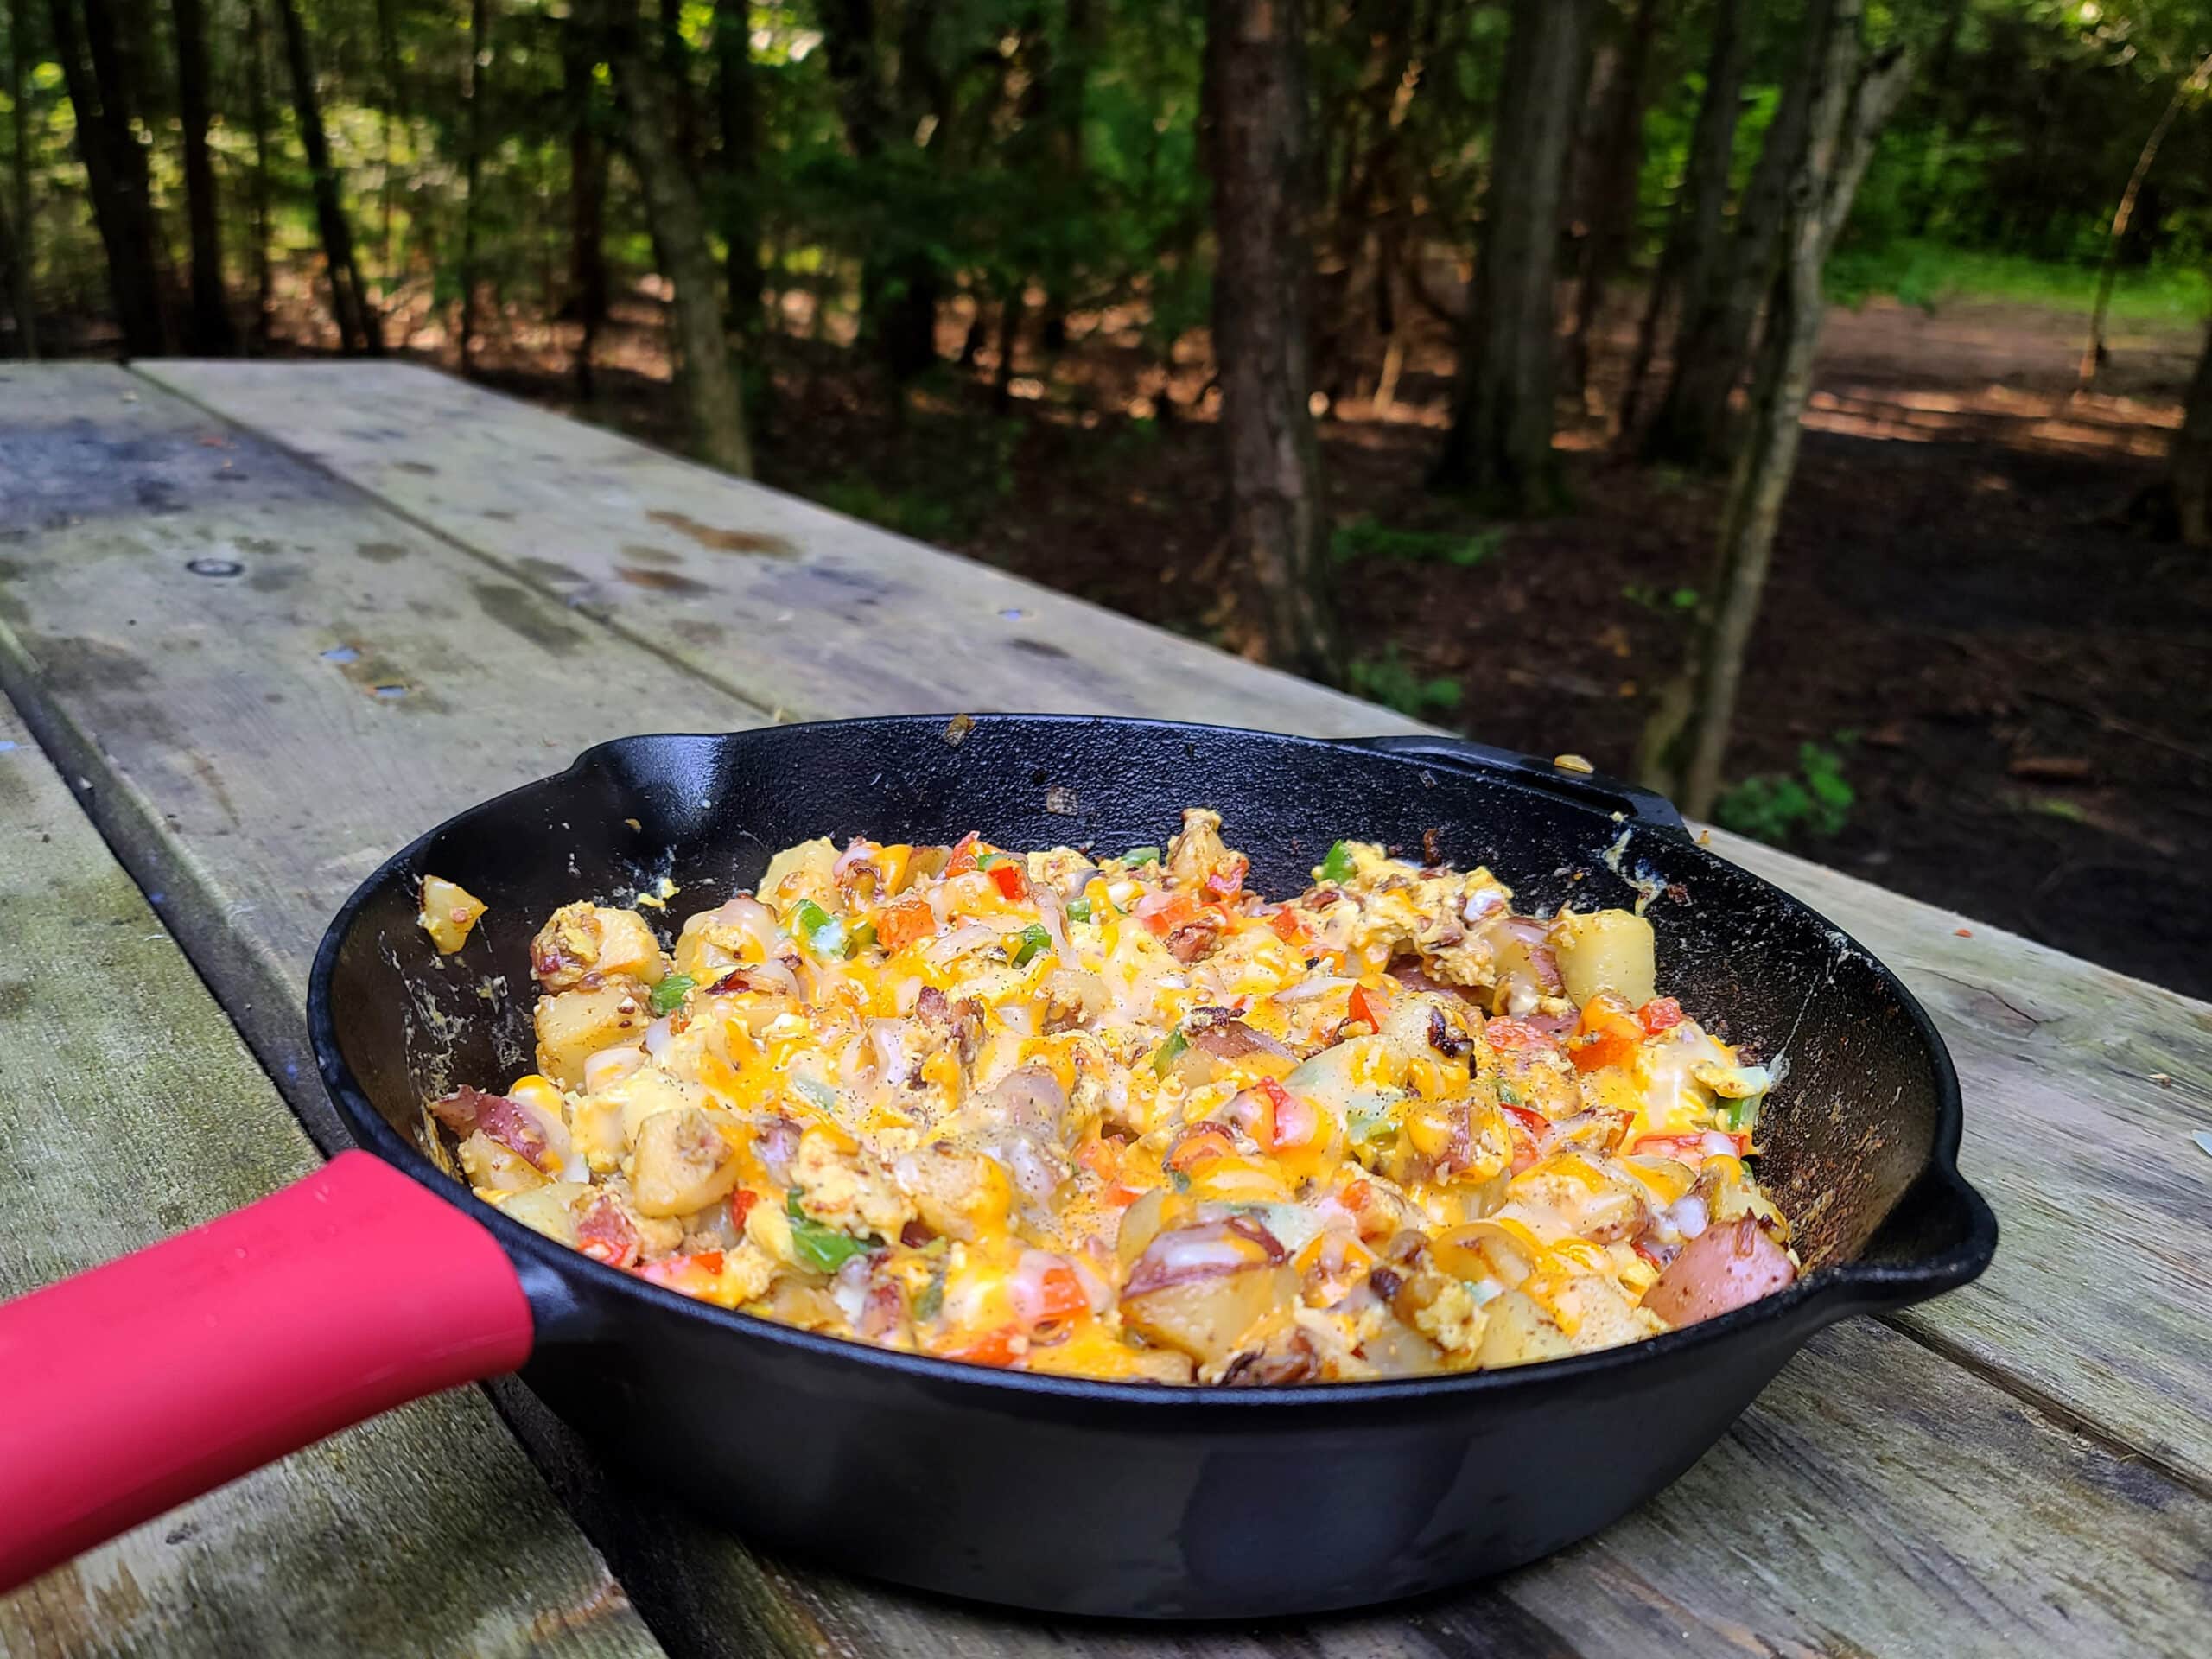 A cast iron pan with potatoes, eggs, peppers, cheese, and bacon, resting on a camping table.